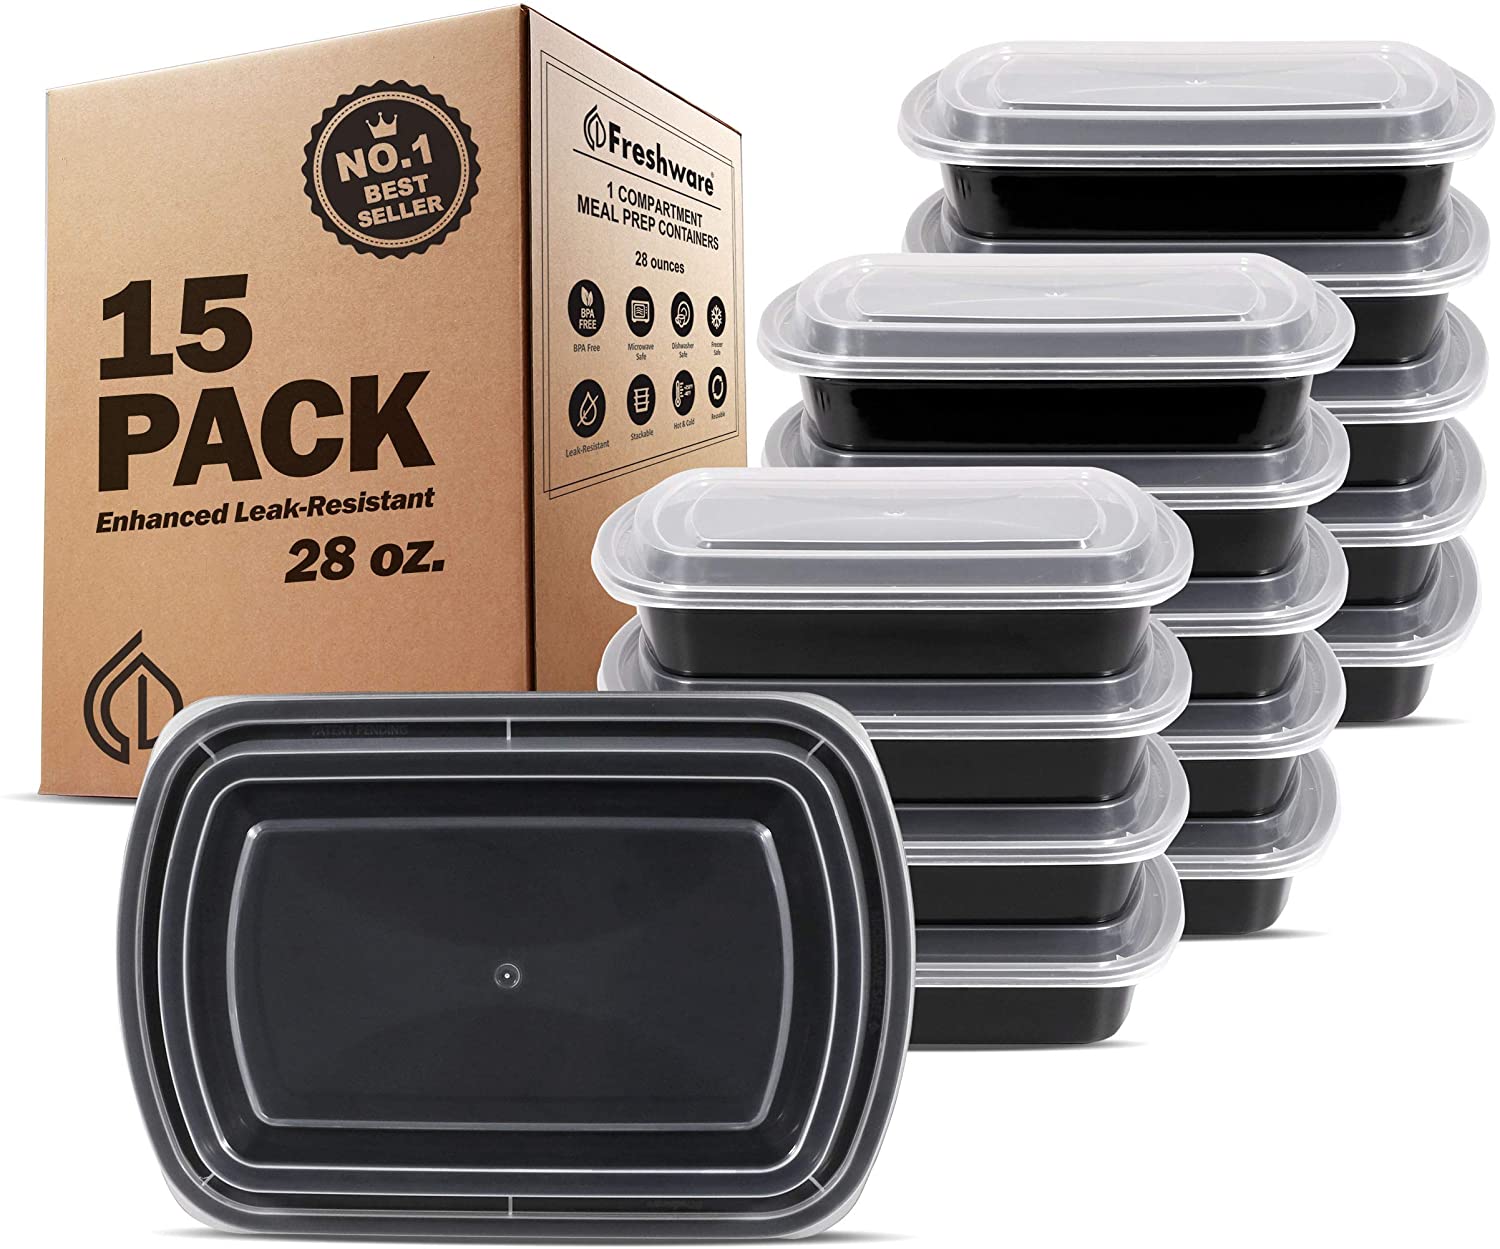 10-50pc Microwavable Meal Prep Container Plastic Food Storage Reusable Lunch